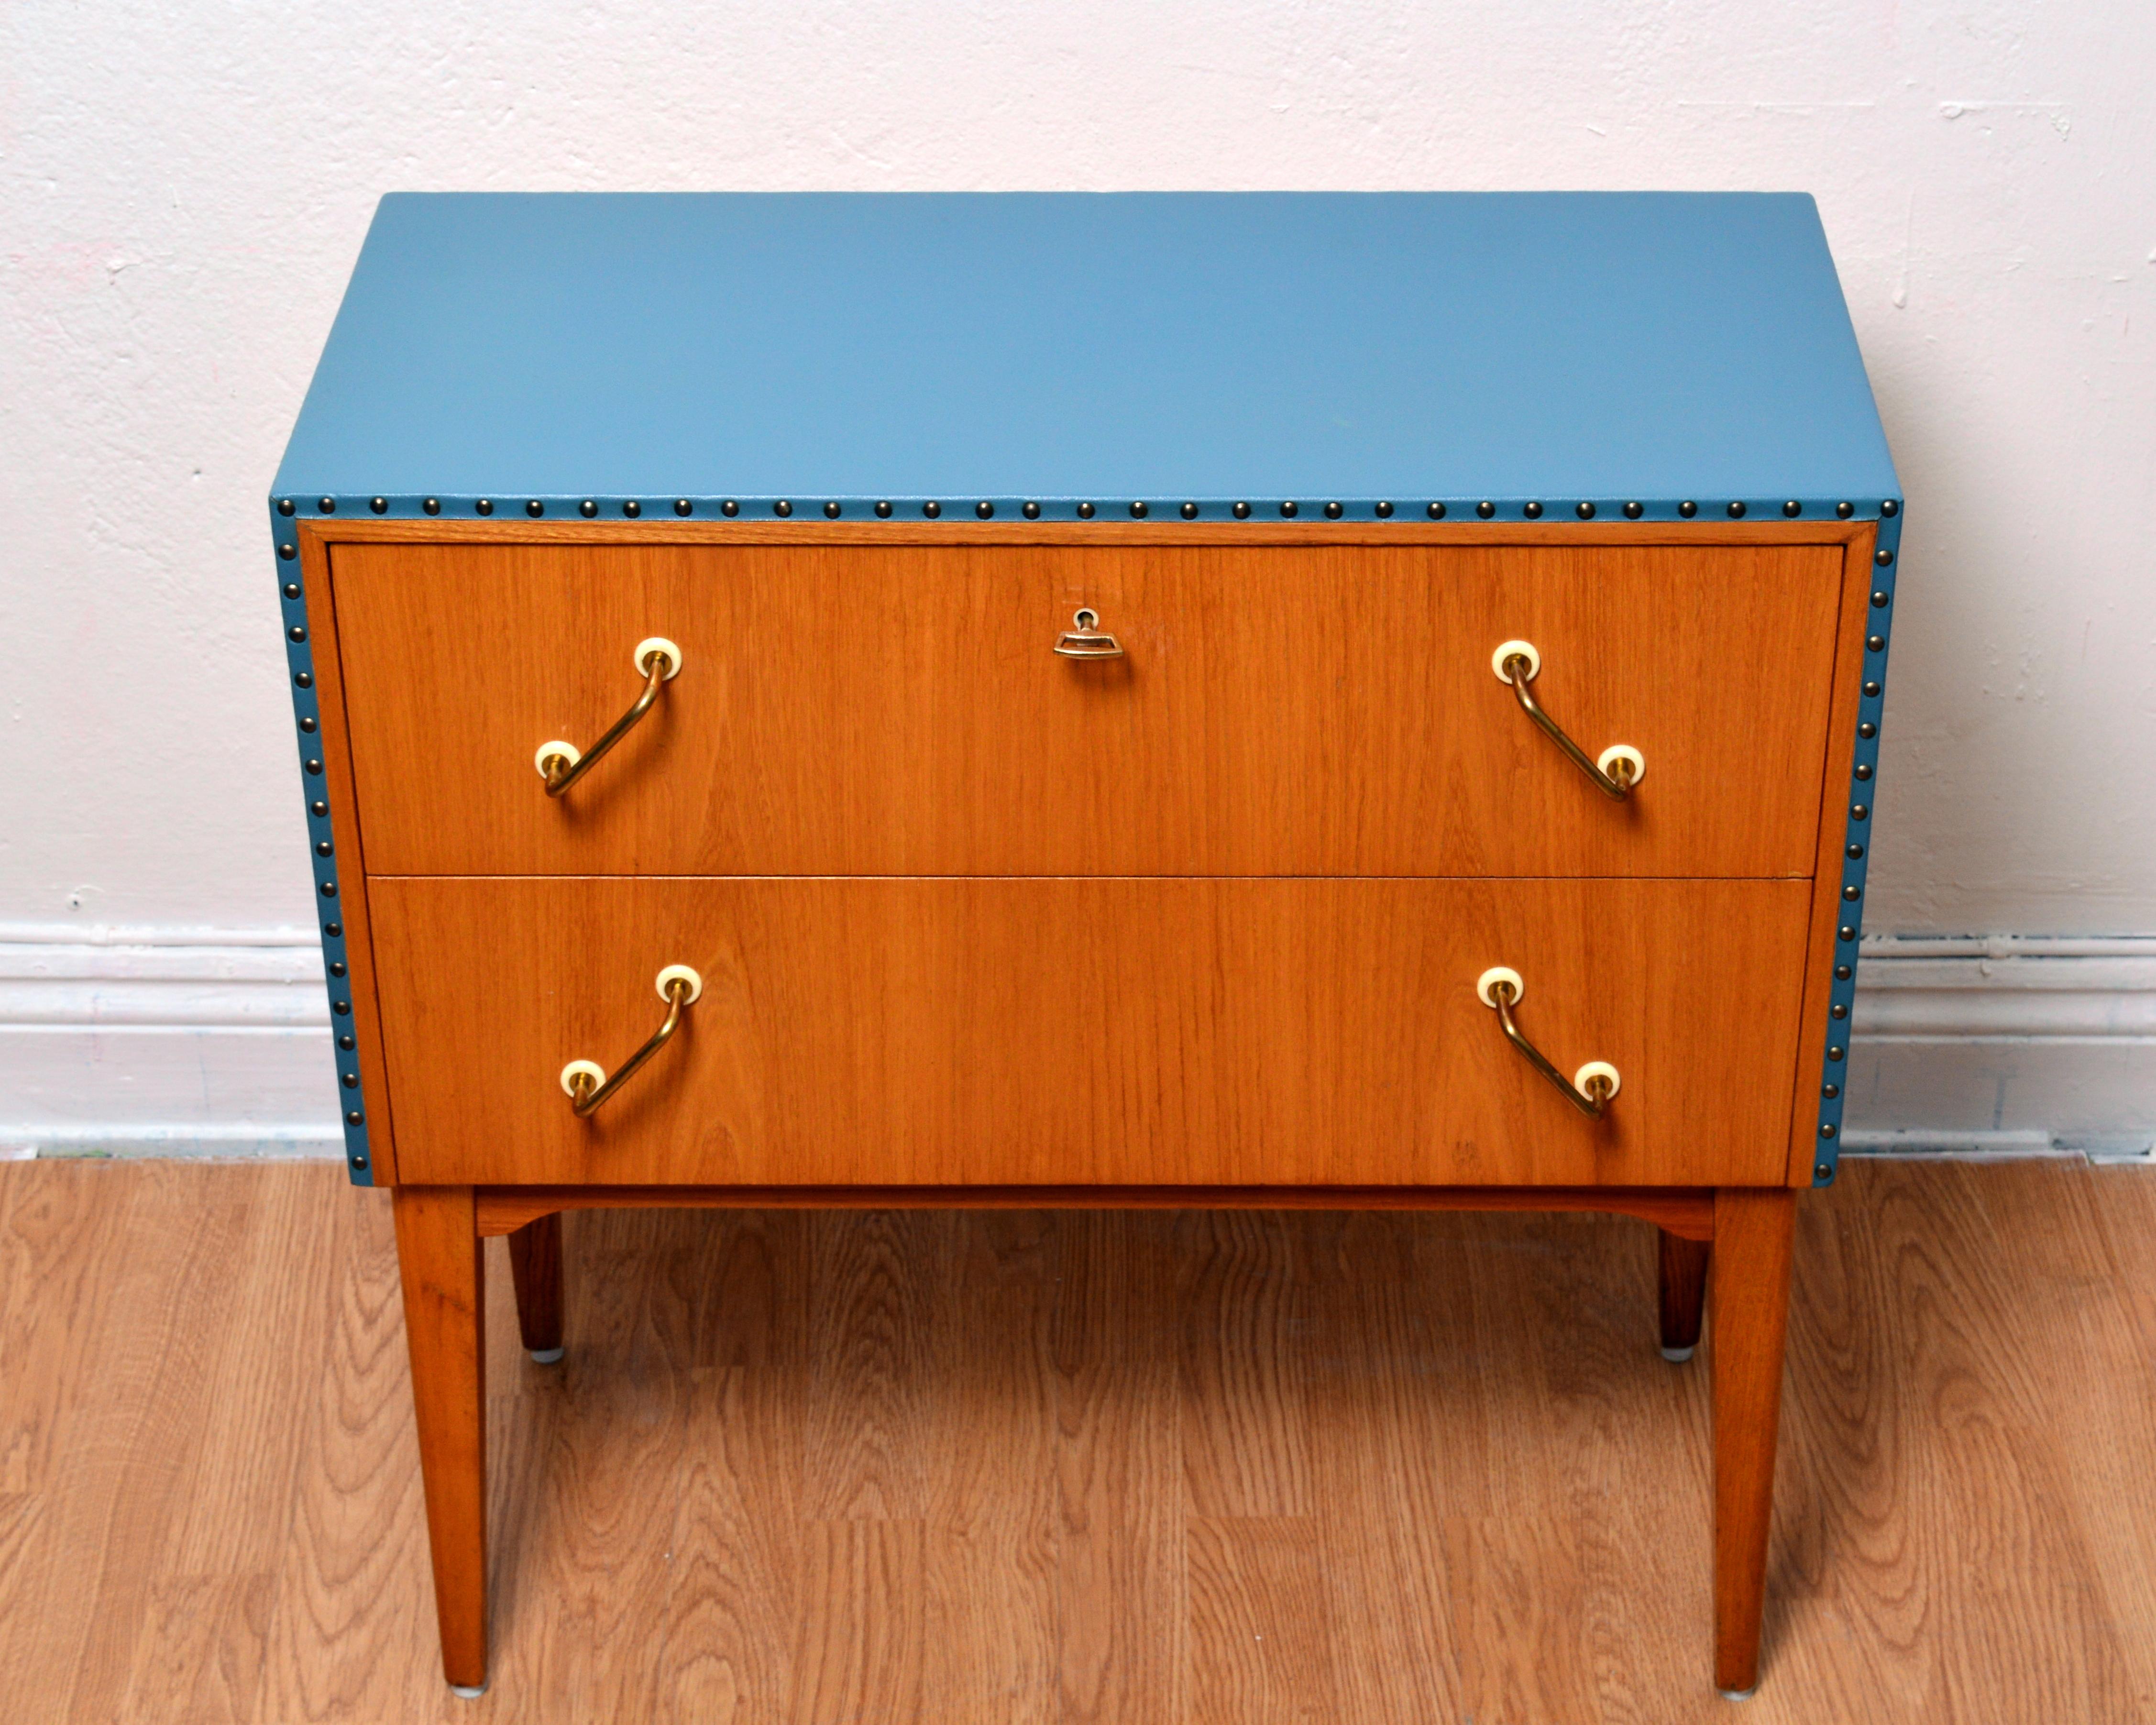 Petite swedish chest of drawers / two drawer cabinet in the style of Swedish designer Otto Schulz. Top nnd sides upholstered with light blue faux leather / leatherette with brass studs edging. Original handles and key in solid brass. Excellent